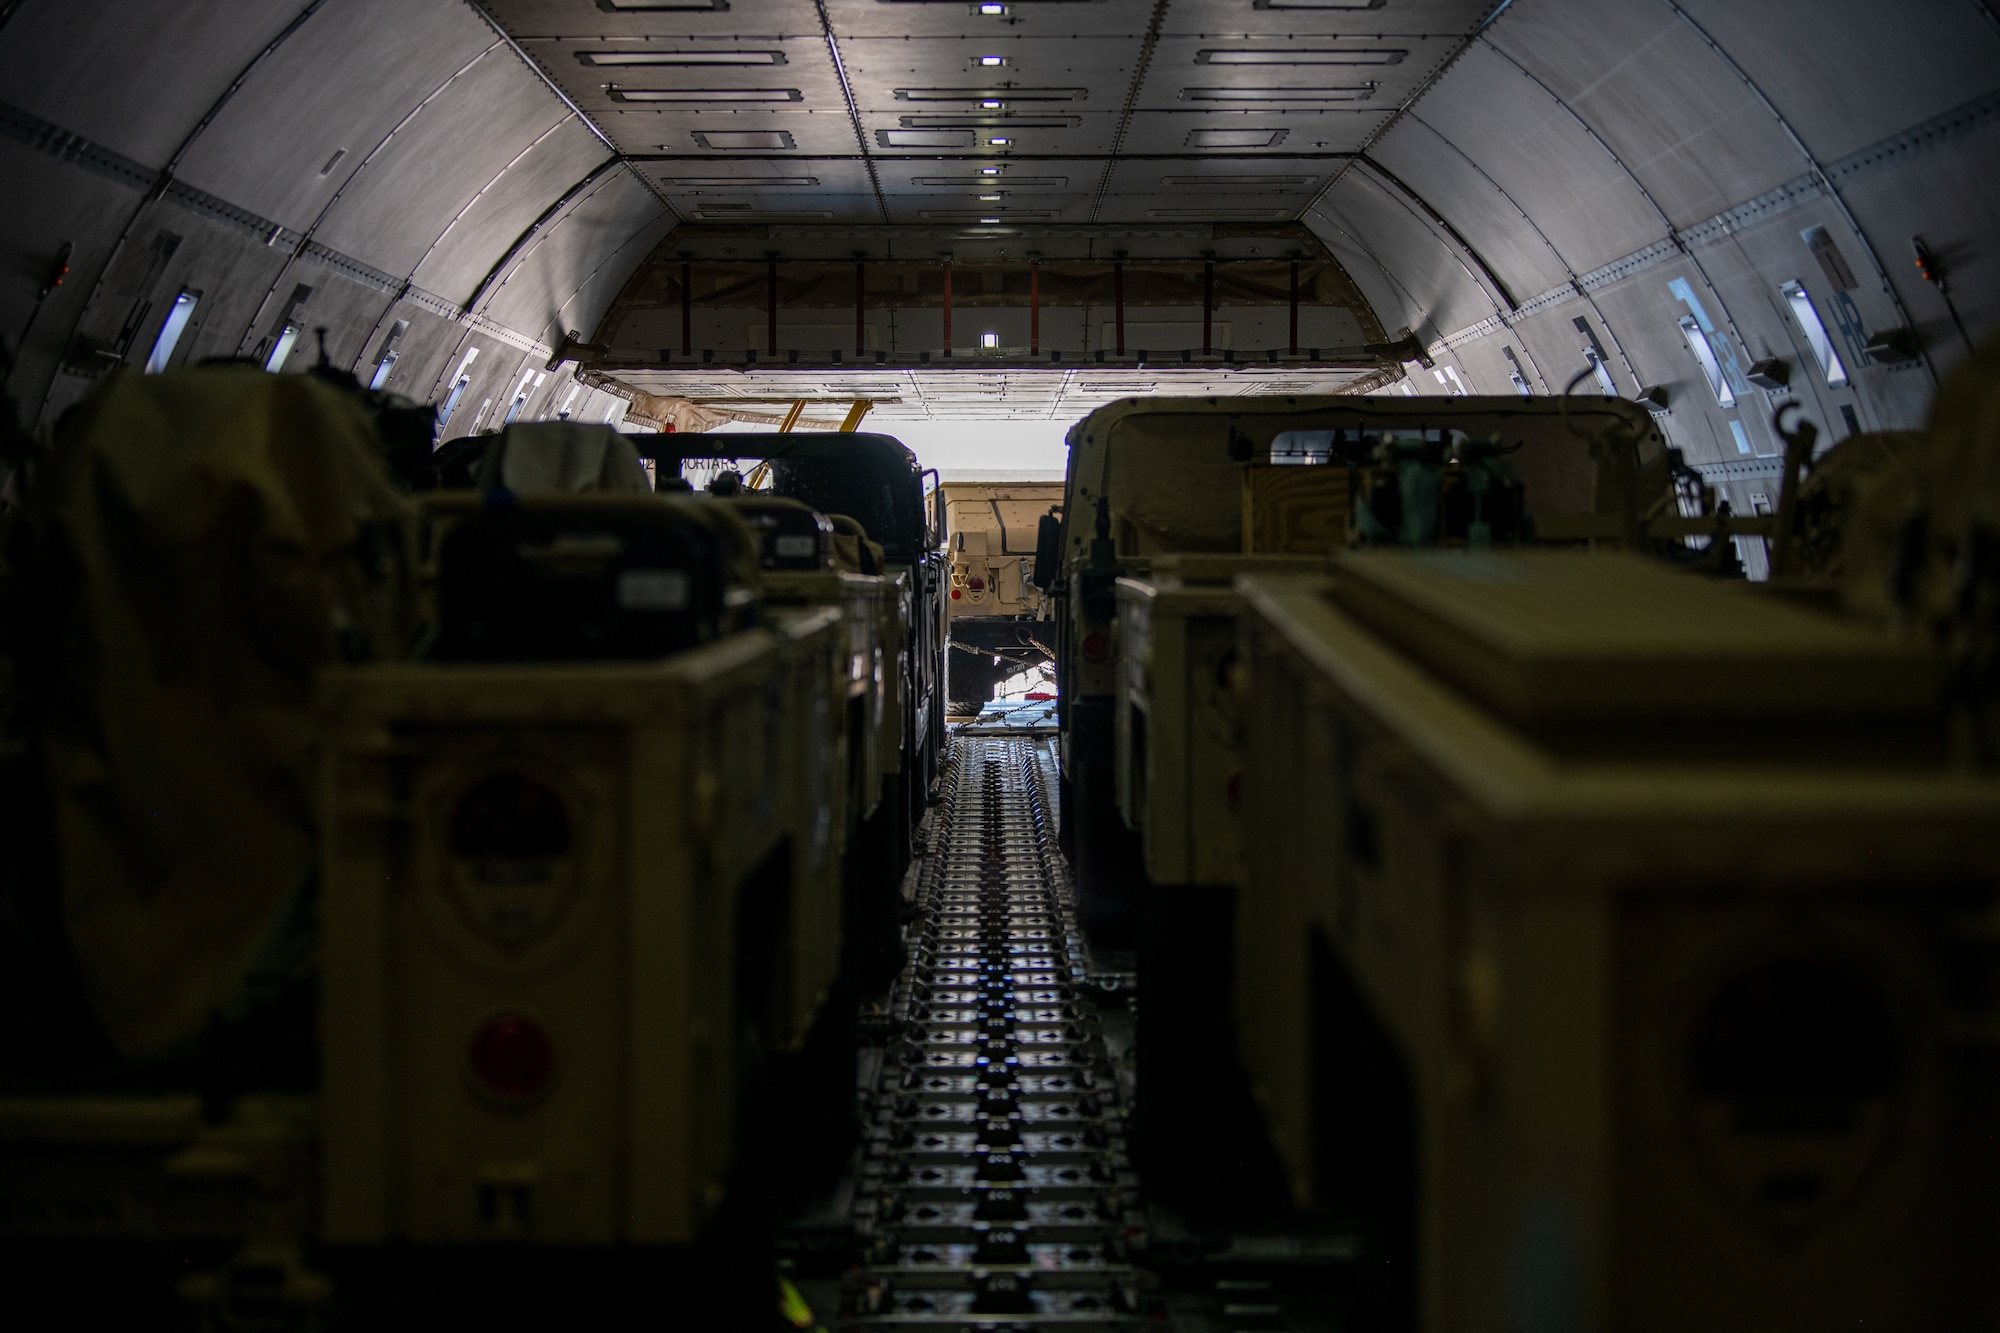 Trailers and Humvees sit in a Boeing 747